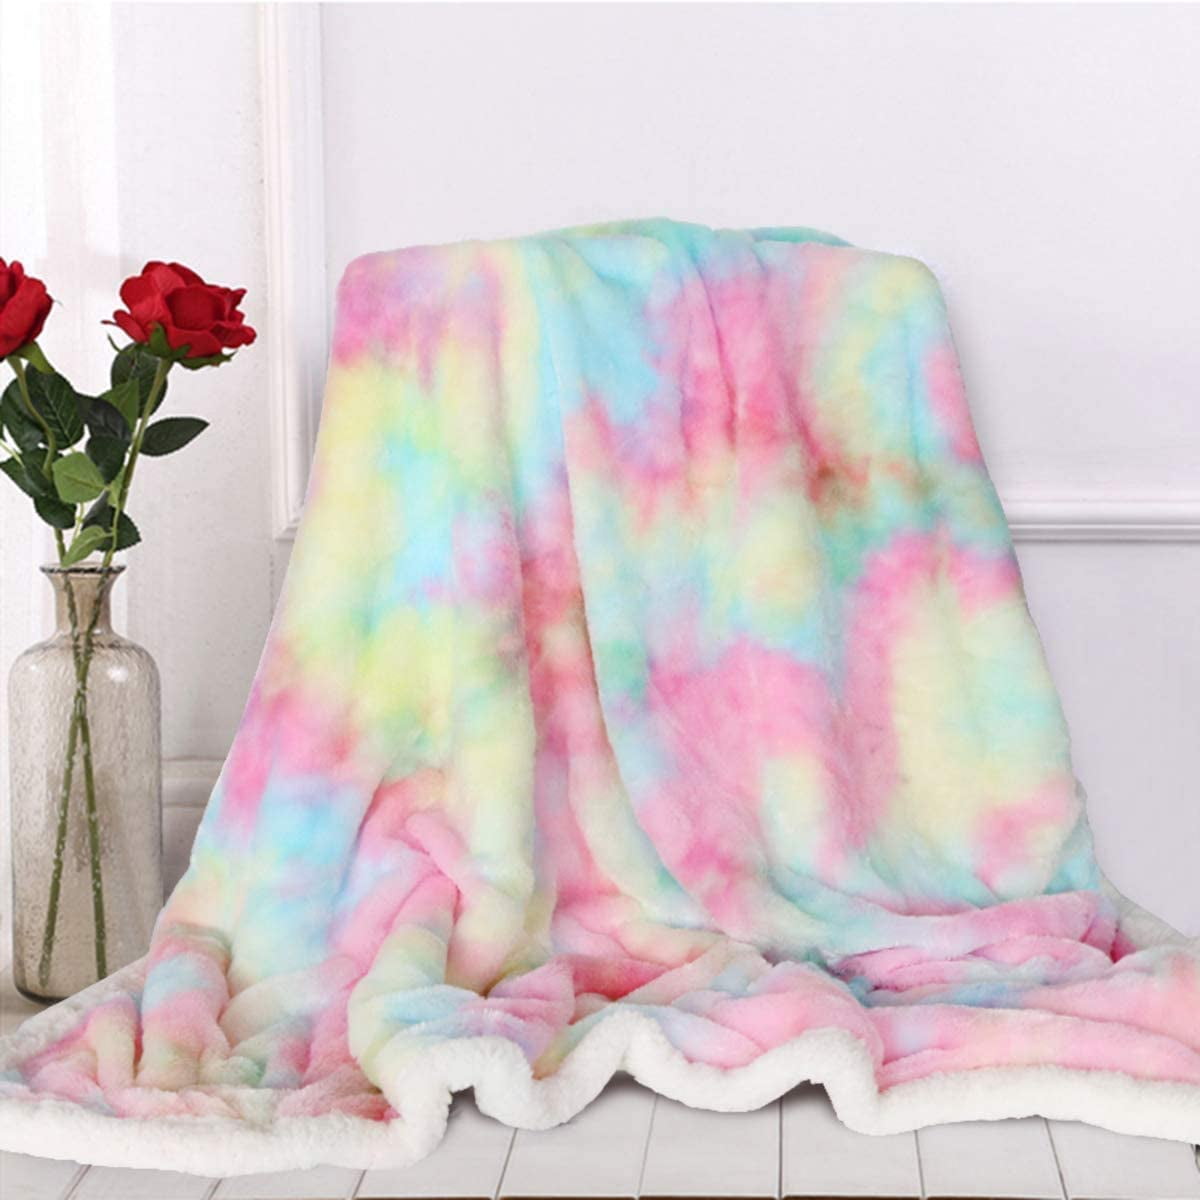 Cloud Dream Home Sherpa Fleece Throw Blanket Blossom Flowers Striped 60x80 inch Fluffy Plush Warm Blanket All Season Cozy Blanket for Baby Kids Adults Painting White Blue